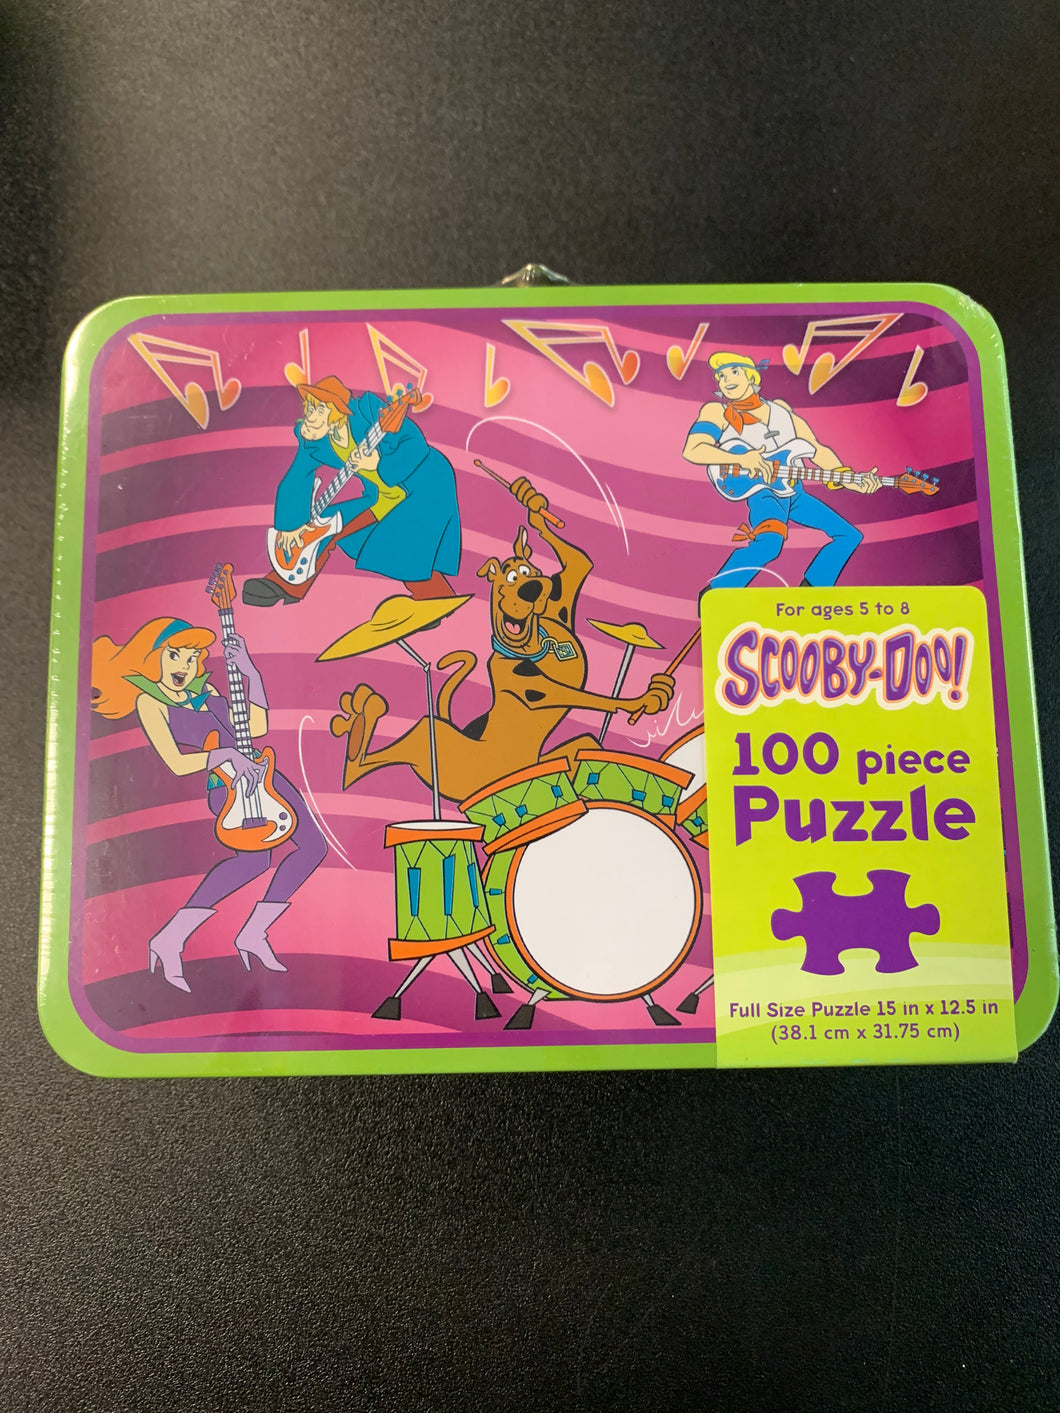 PRESSMAN SCOOBY-DOO & GANG IN BAND 100 PIECE PUZZLE IN TIN TOTE LUNCHBOX